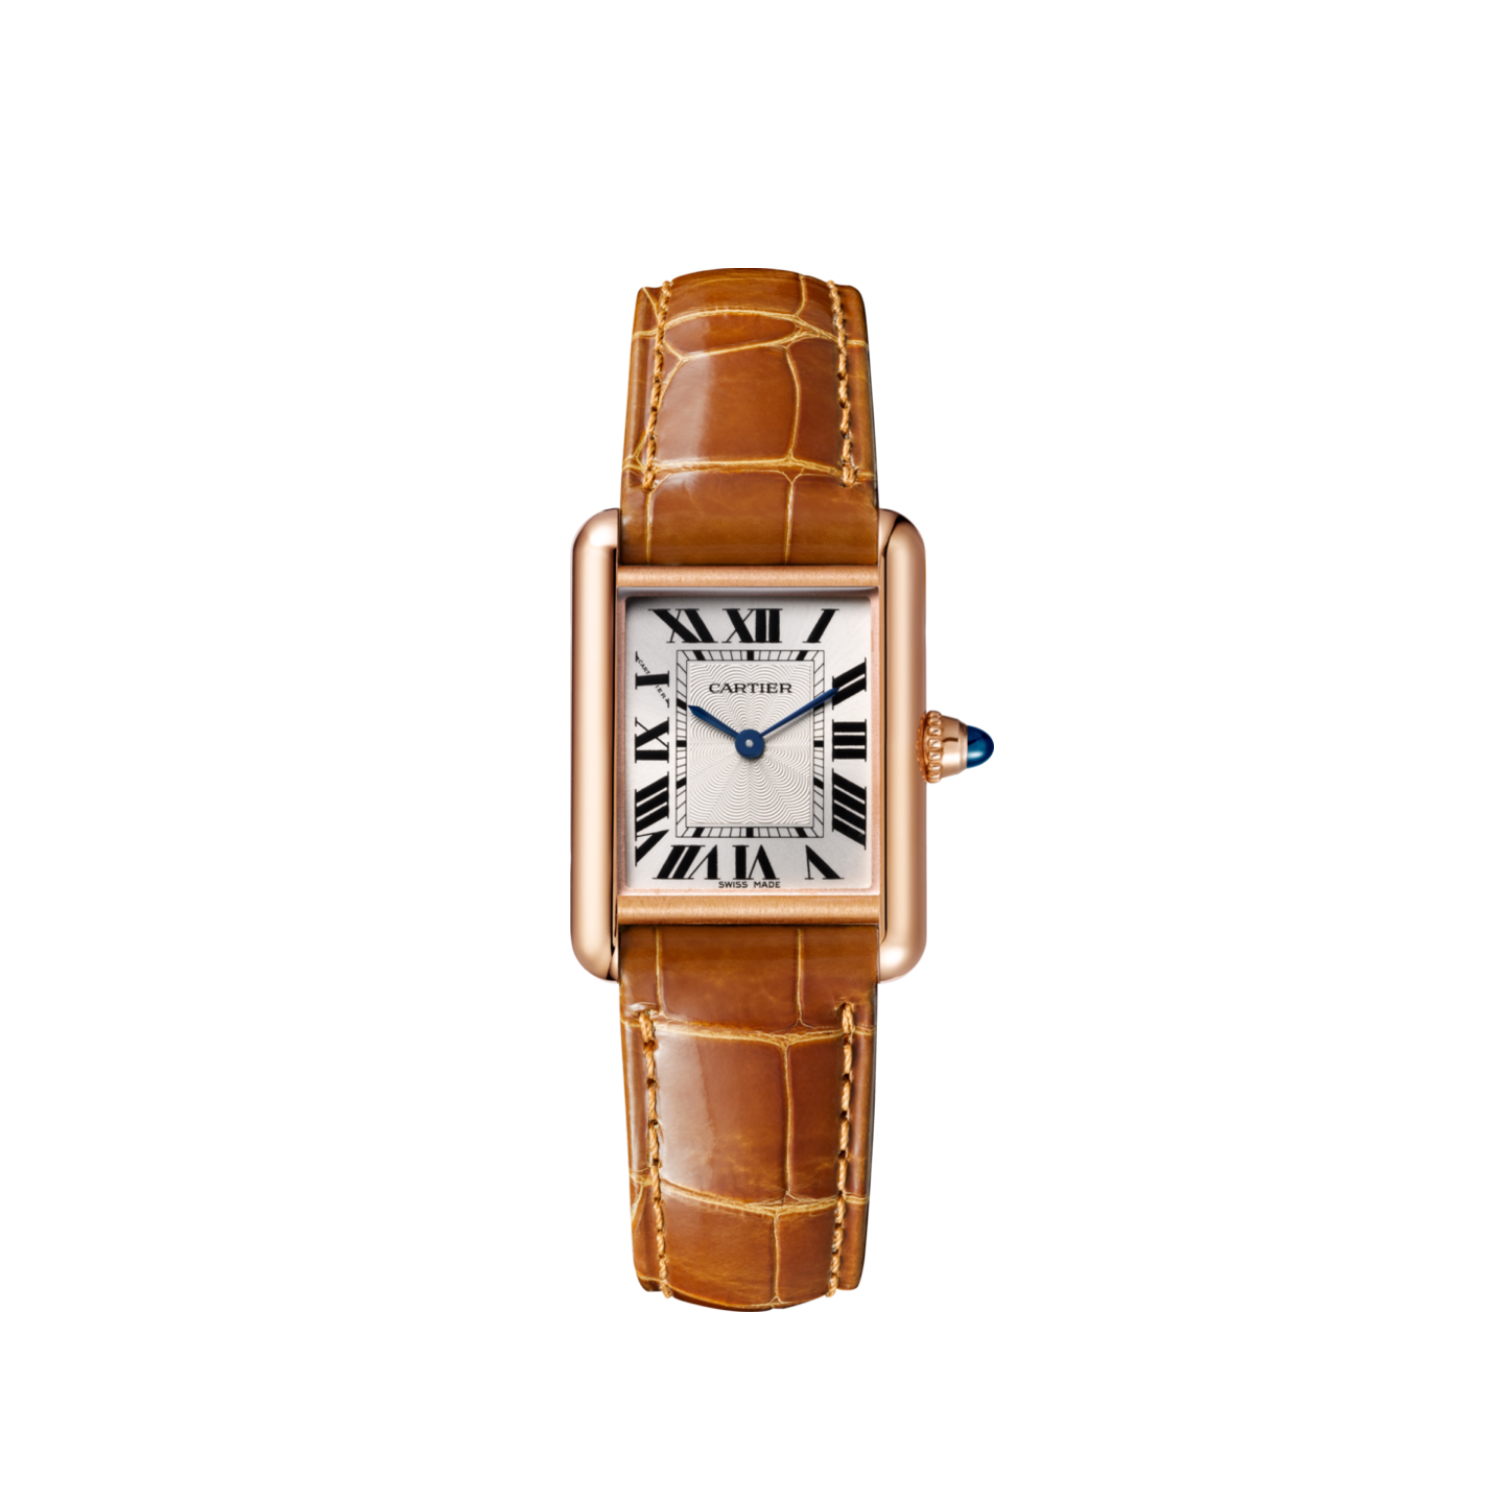 Picture of TANK LOUISE CARTIER - PINK GOLD HAND-WOUND SMALL